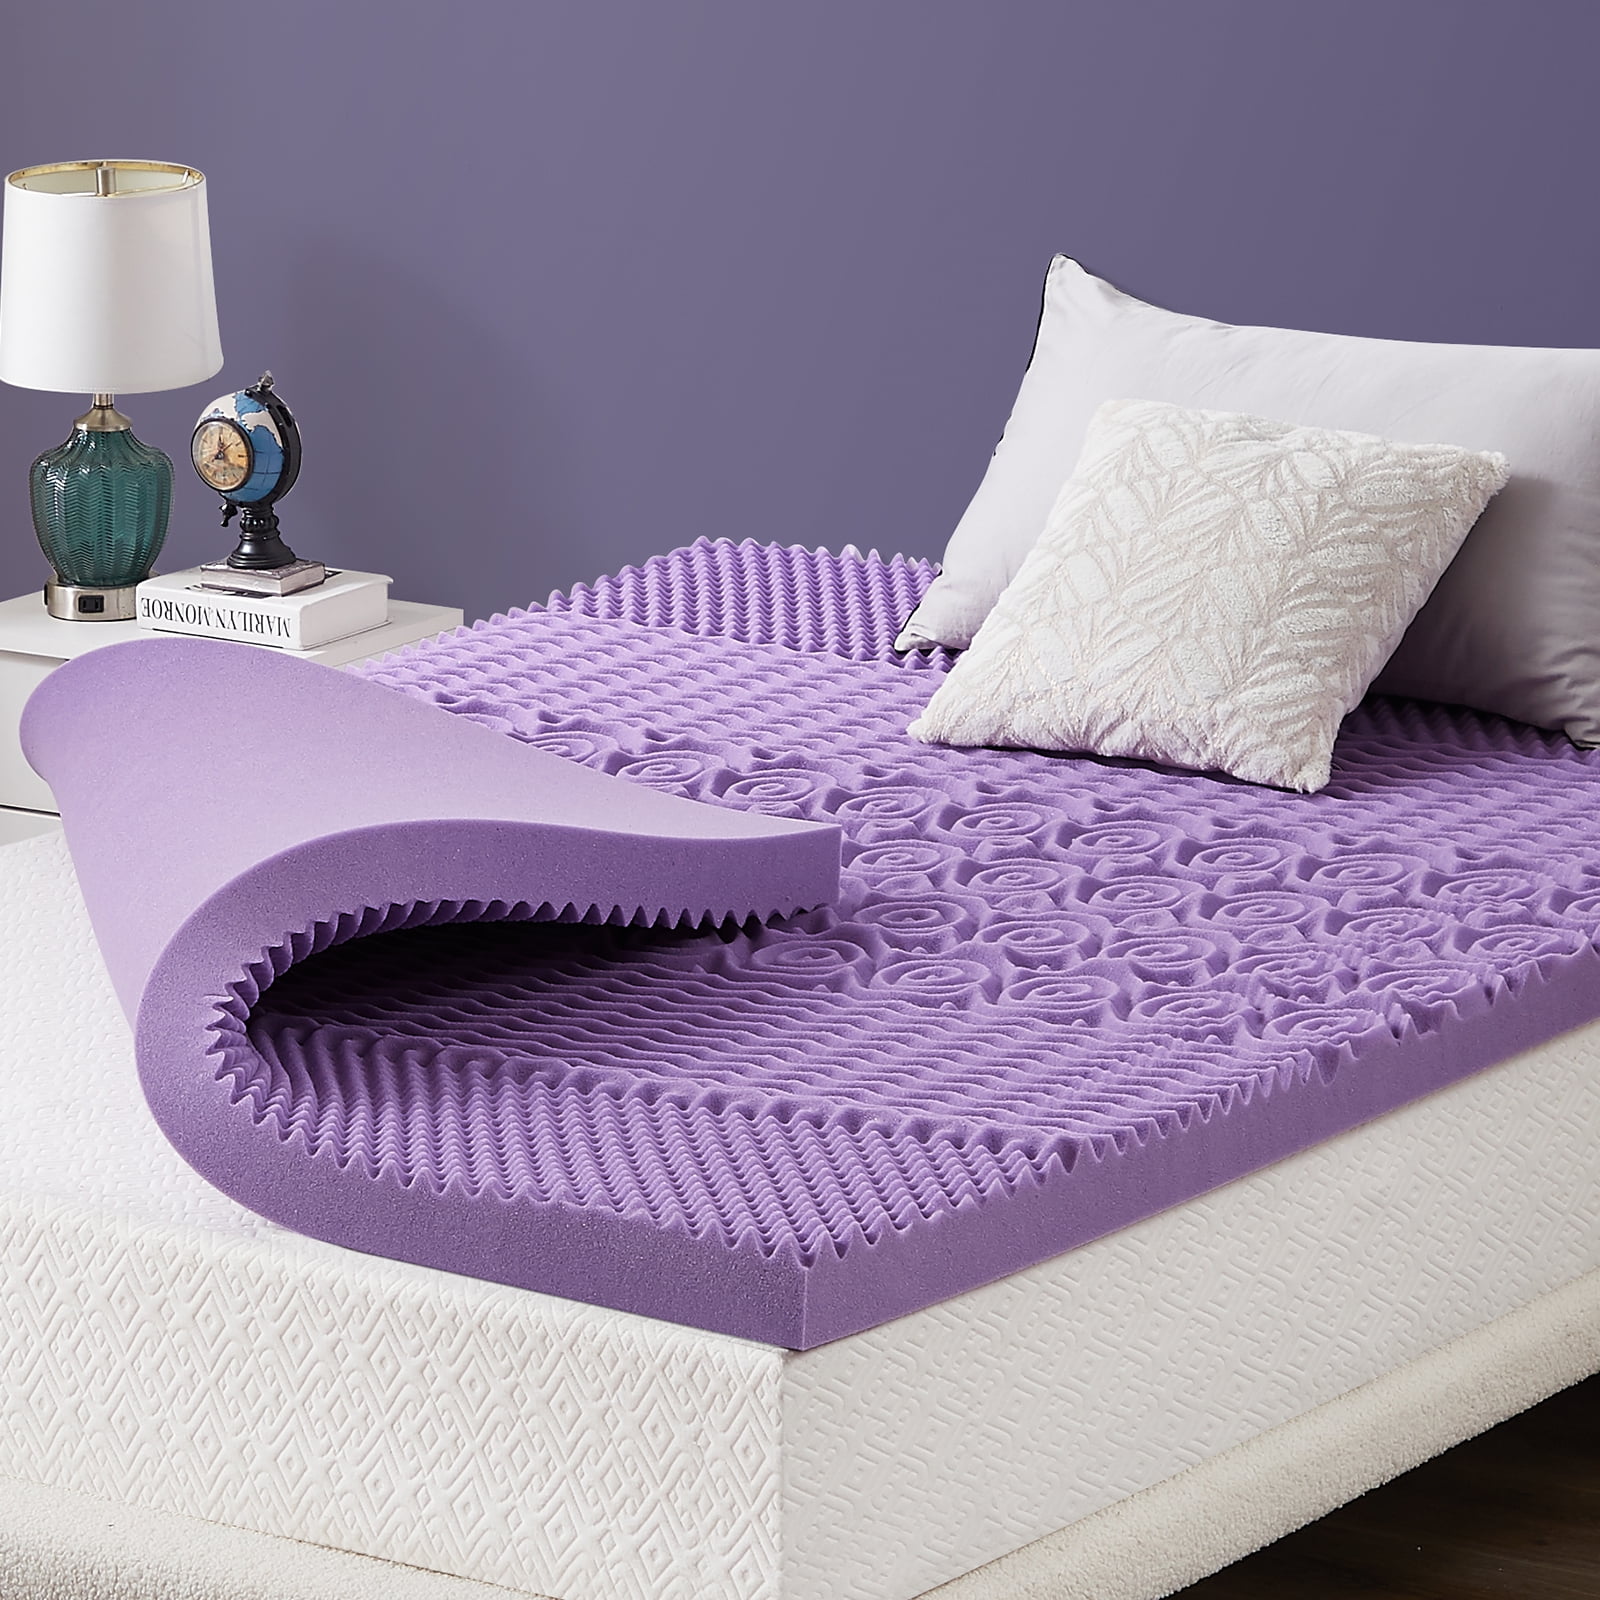 DMI Foam Mattress Topper, Egg Crate Foam Pad, Mattress Pad and Bed Topper for Support, Air Circulation, Pressure Relief and Weight Distribution